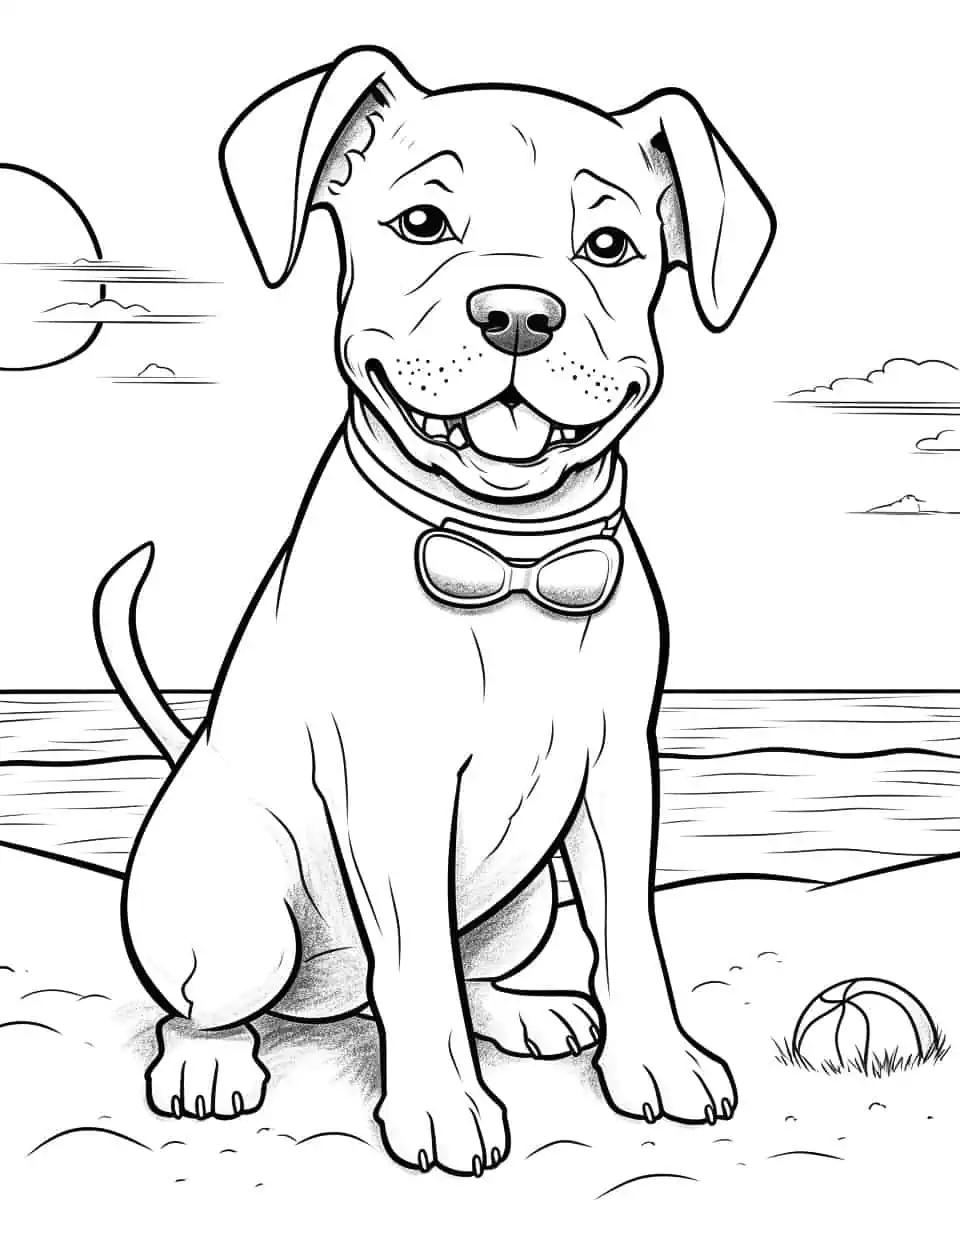 Pitbull at the Beach Coloring Page - A Pitbull playing with a beach ball on a sunny beach.